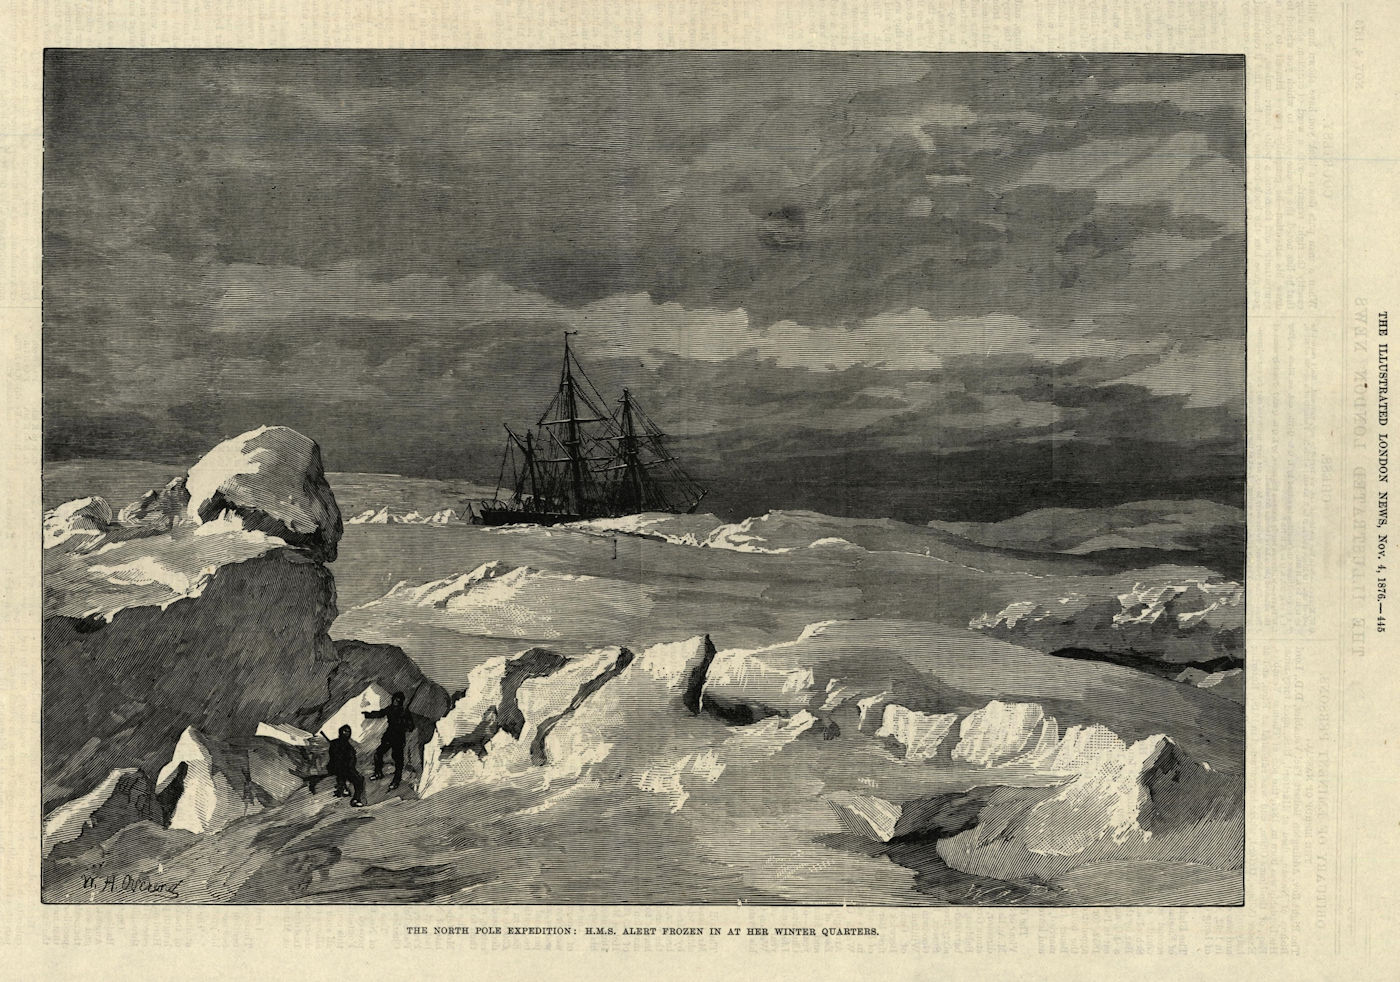 North Pole expedition: HMS Alert frozen in her winter quarters. Arctic 1876